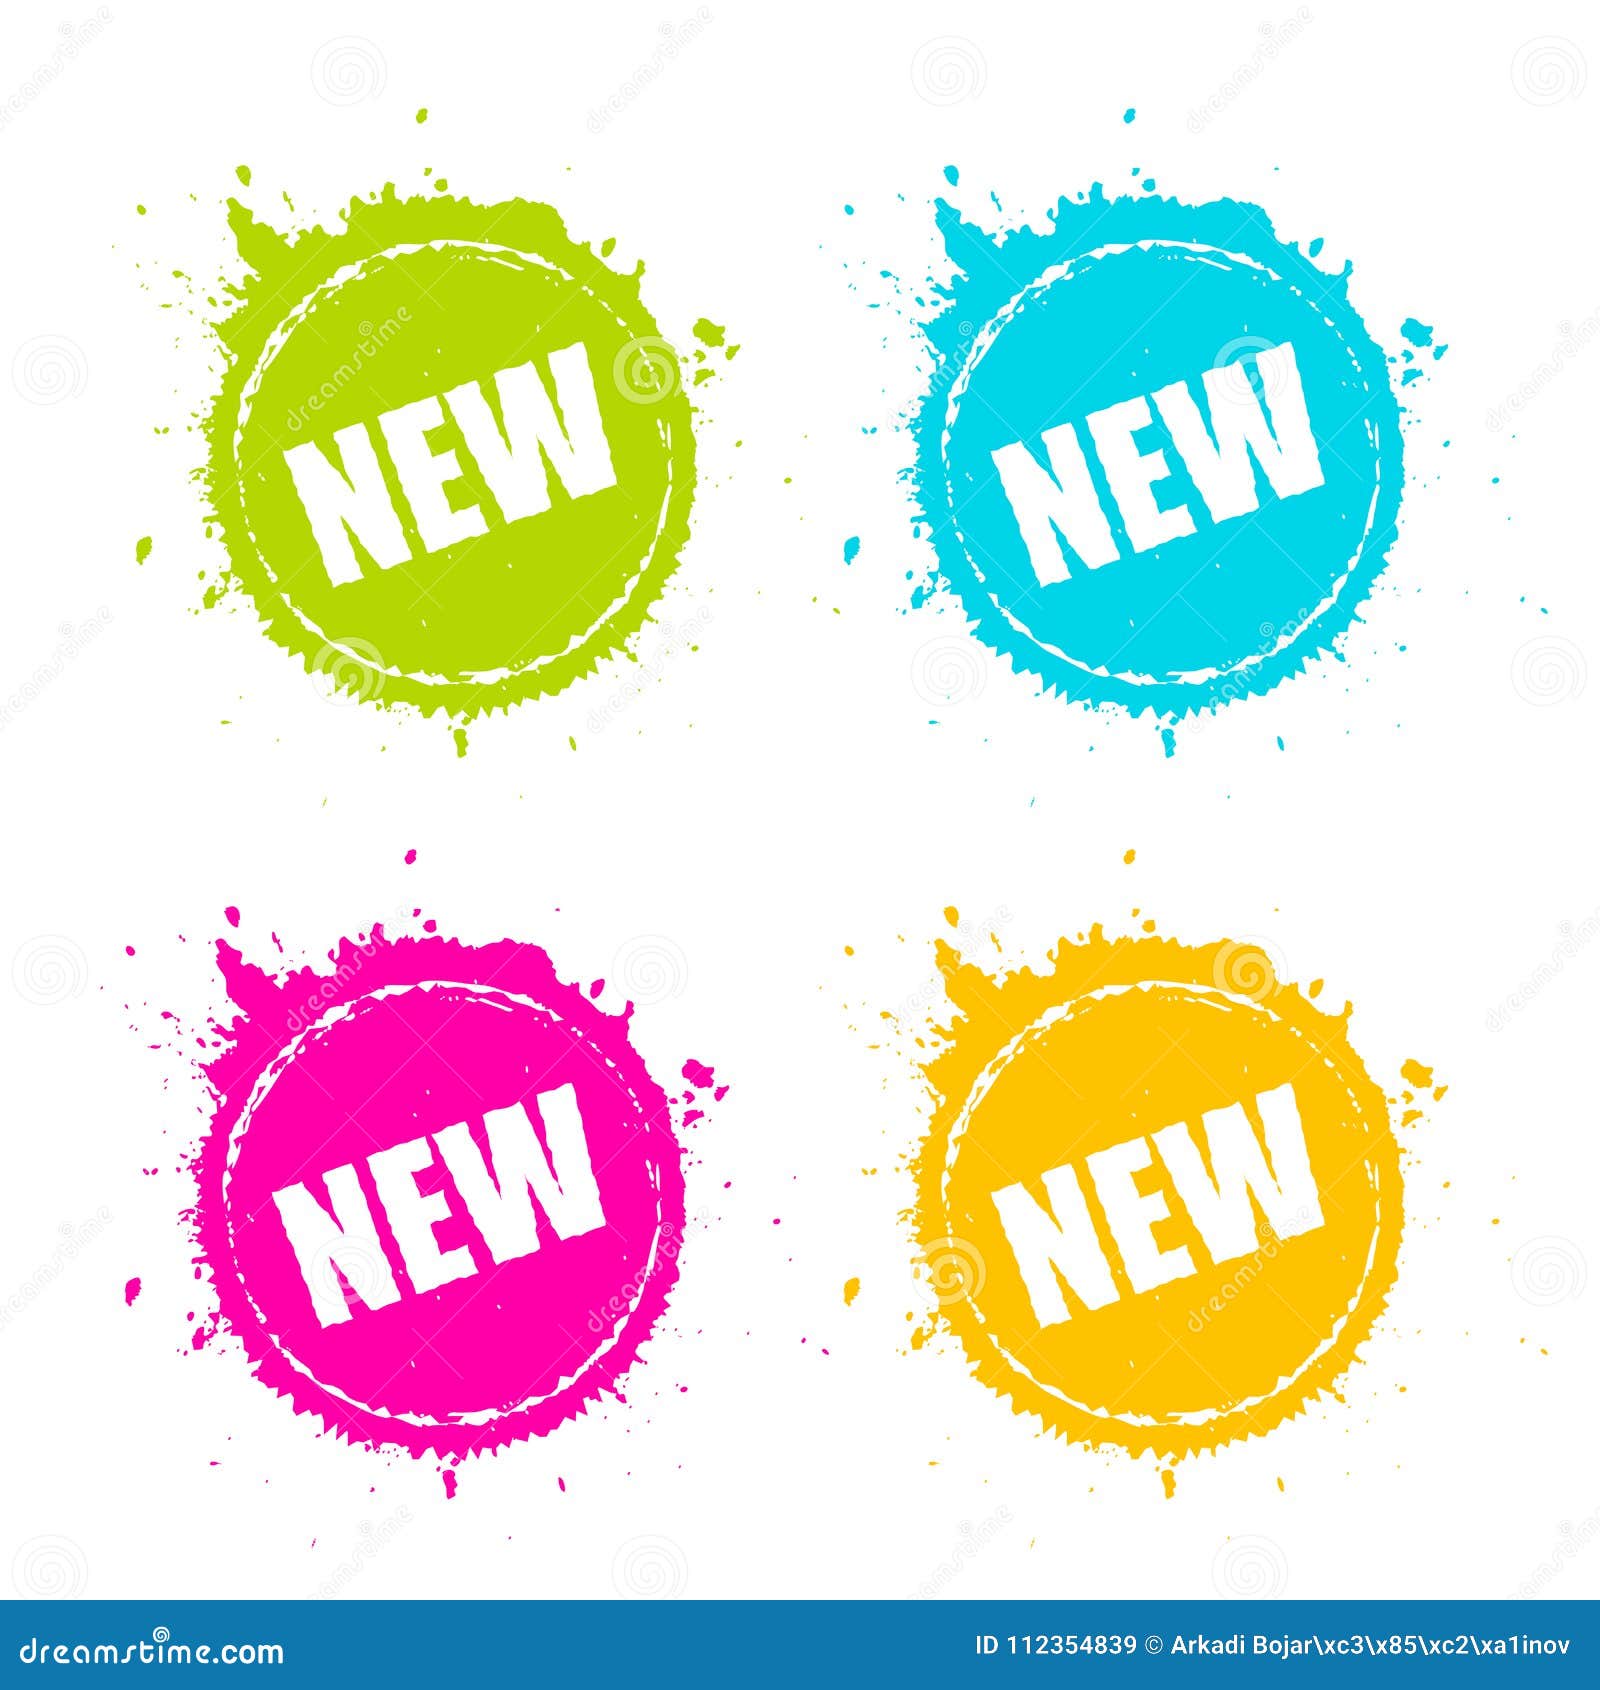 new product promotion splattered  icon